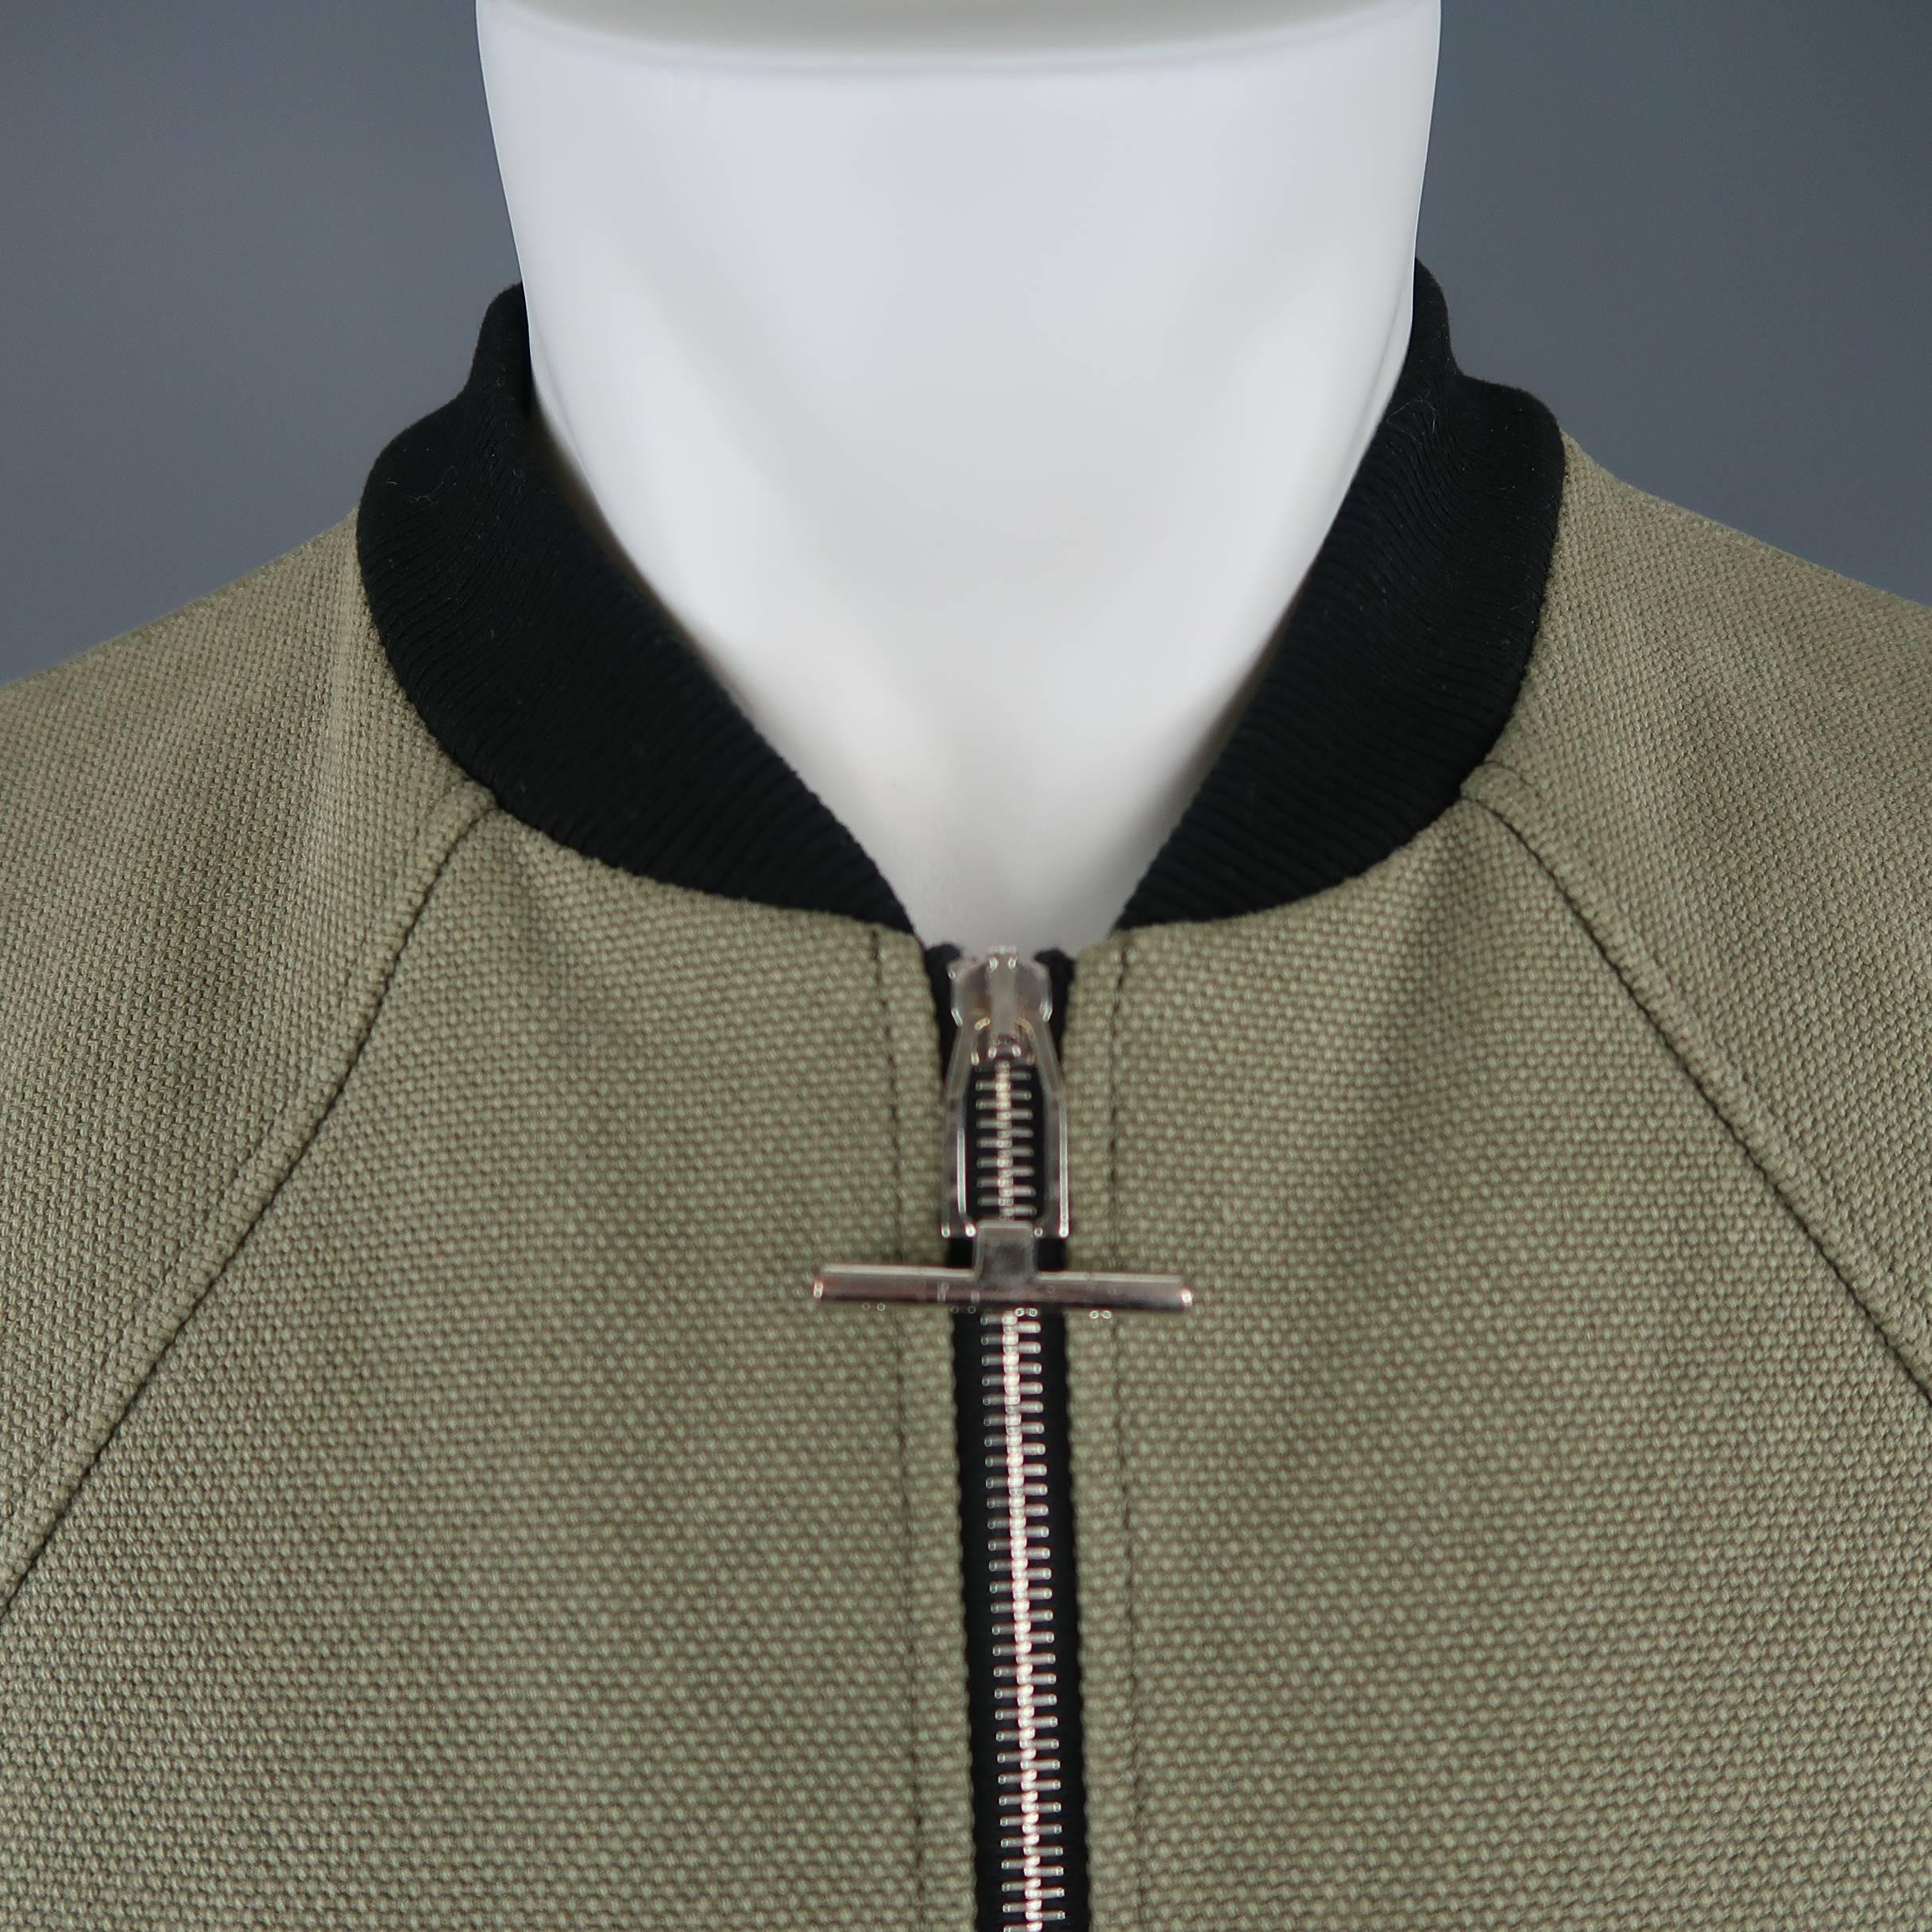 BALENCIAGA by ALEXANDER WANG Cristóbal cropped bomber jacket comes in olive green canvas with curved raglan sleeves, zip front with silver tone engraved tab, black ribbed baseball collar and cuffs, and extended back. Minor wear and small